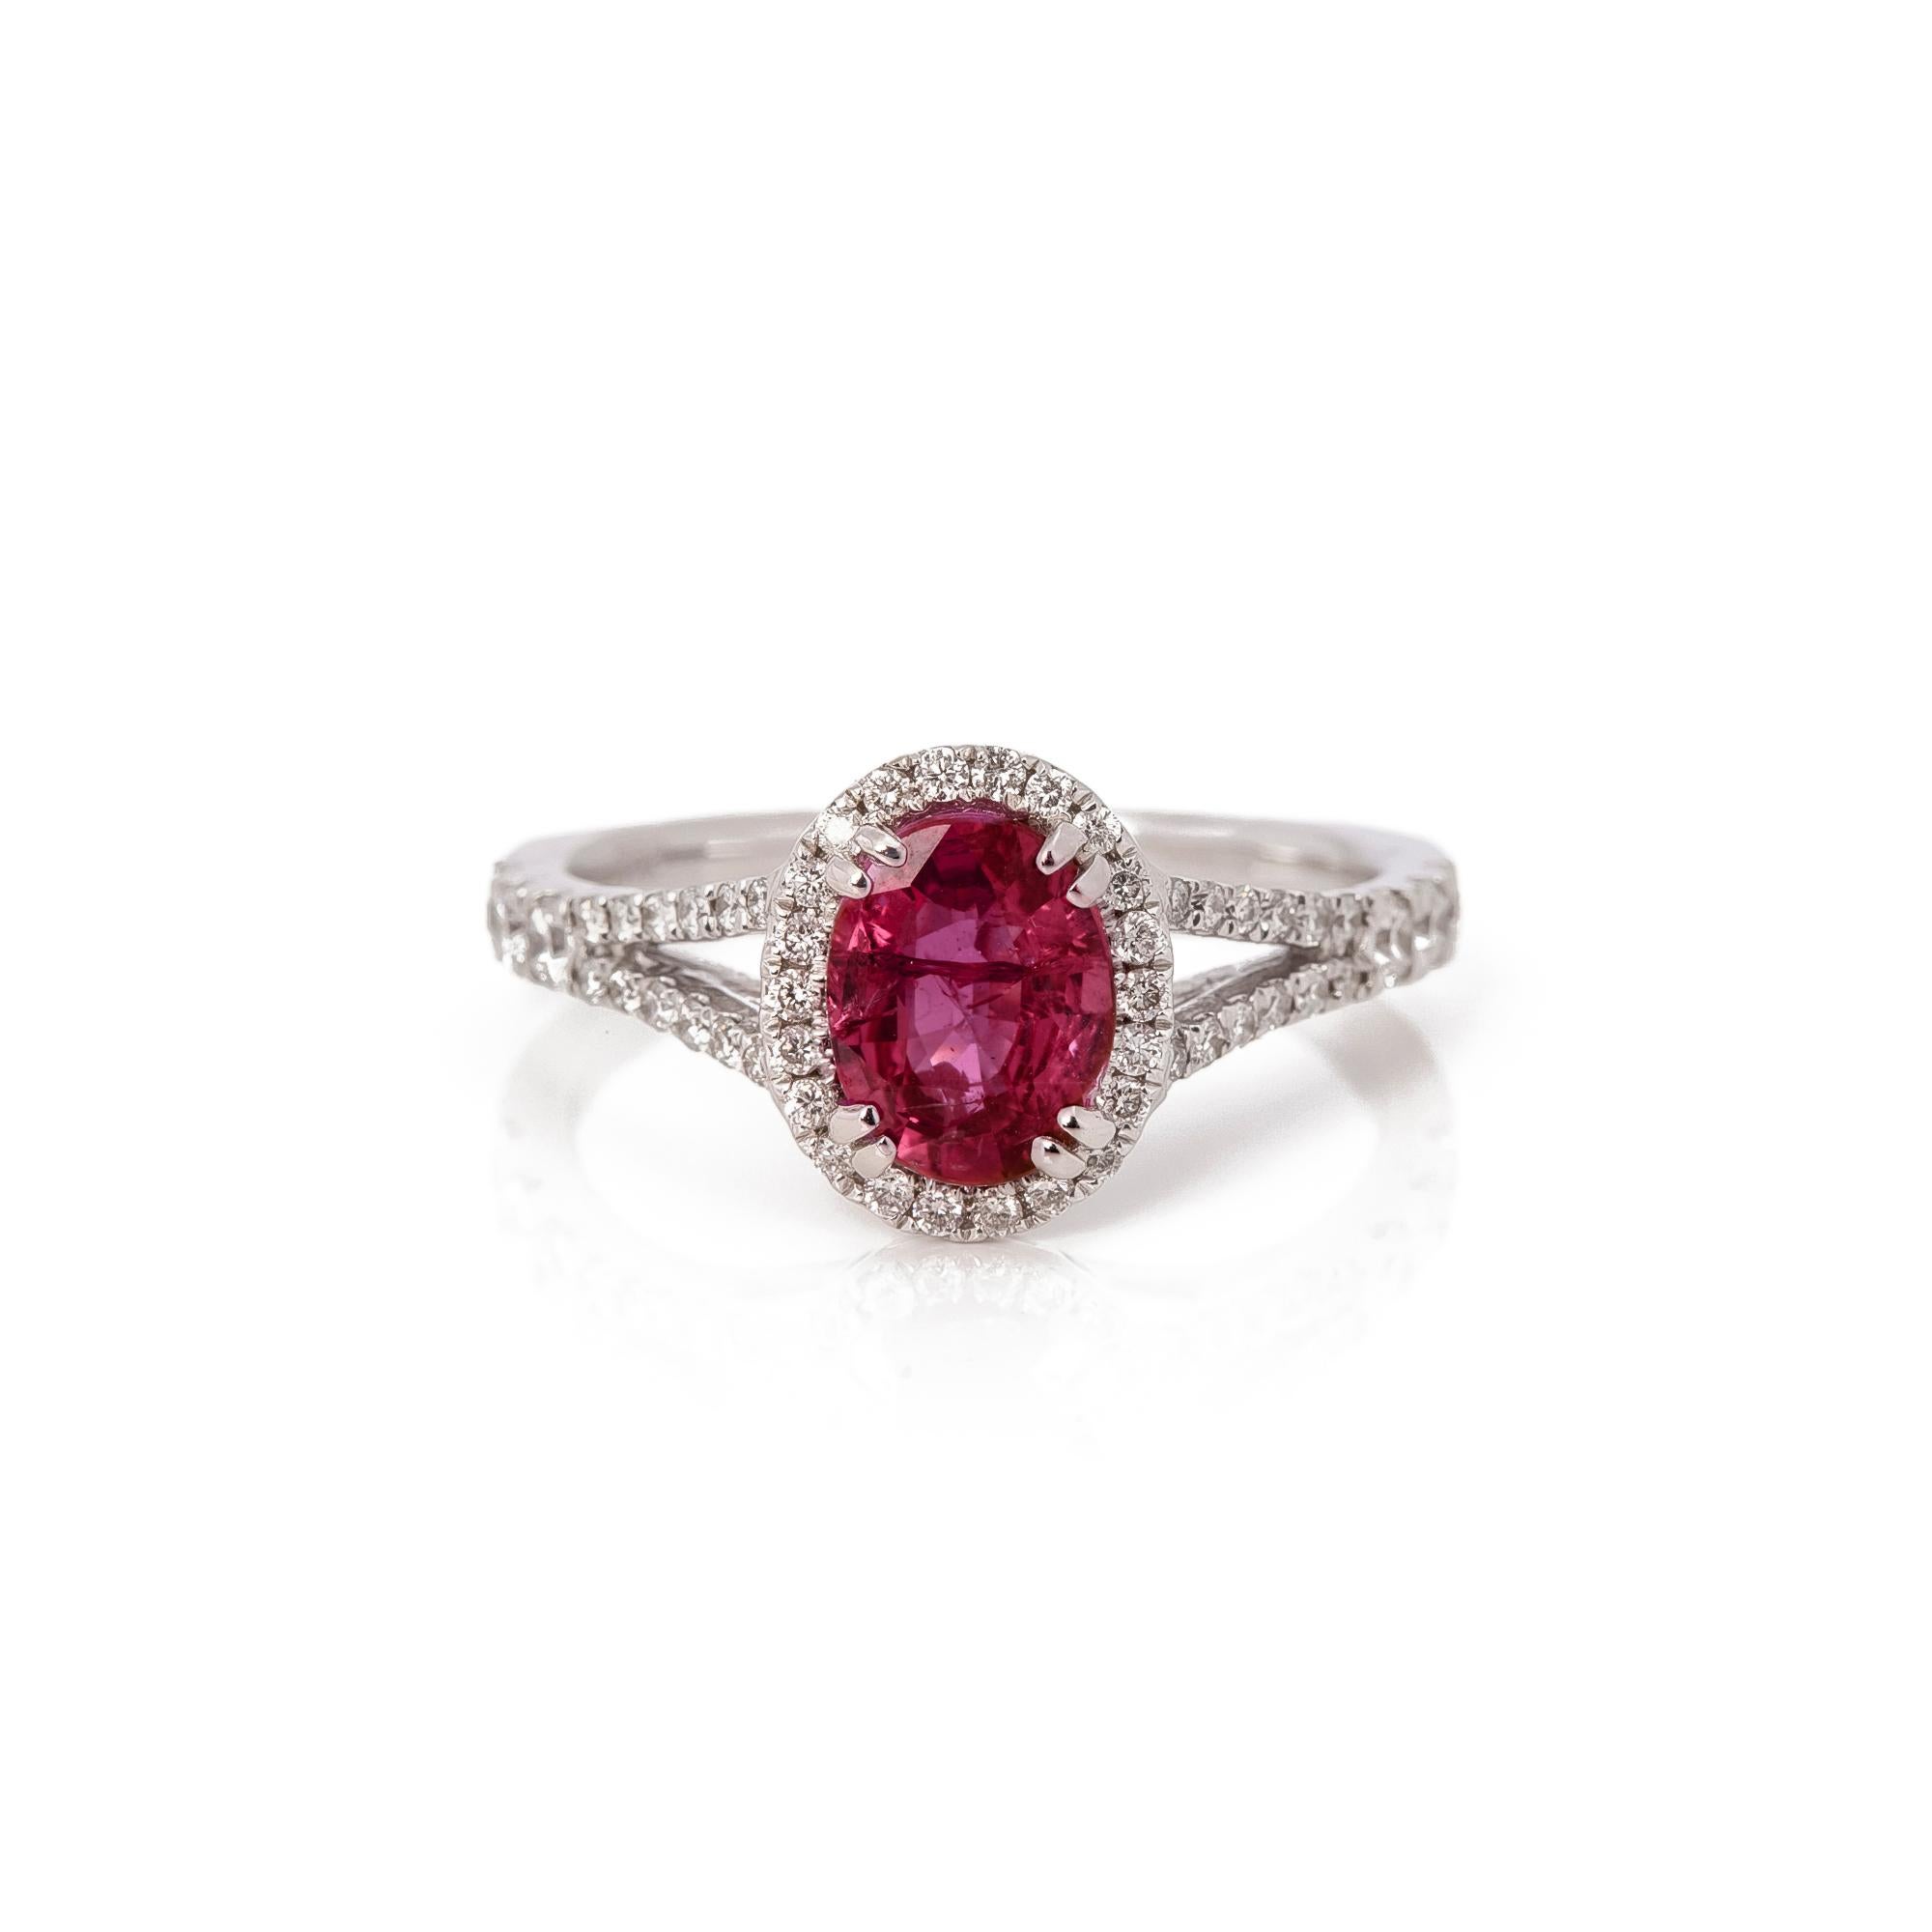 This ring is from the private collection of gemstone jewellery individually designed by David Jerome. It features an untreated oval cut ruby set with diamonds. Accompanied by an IGI gem certificate. UK ring size M. EU ring size 53. US ring size 6